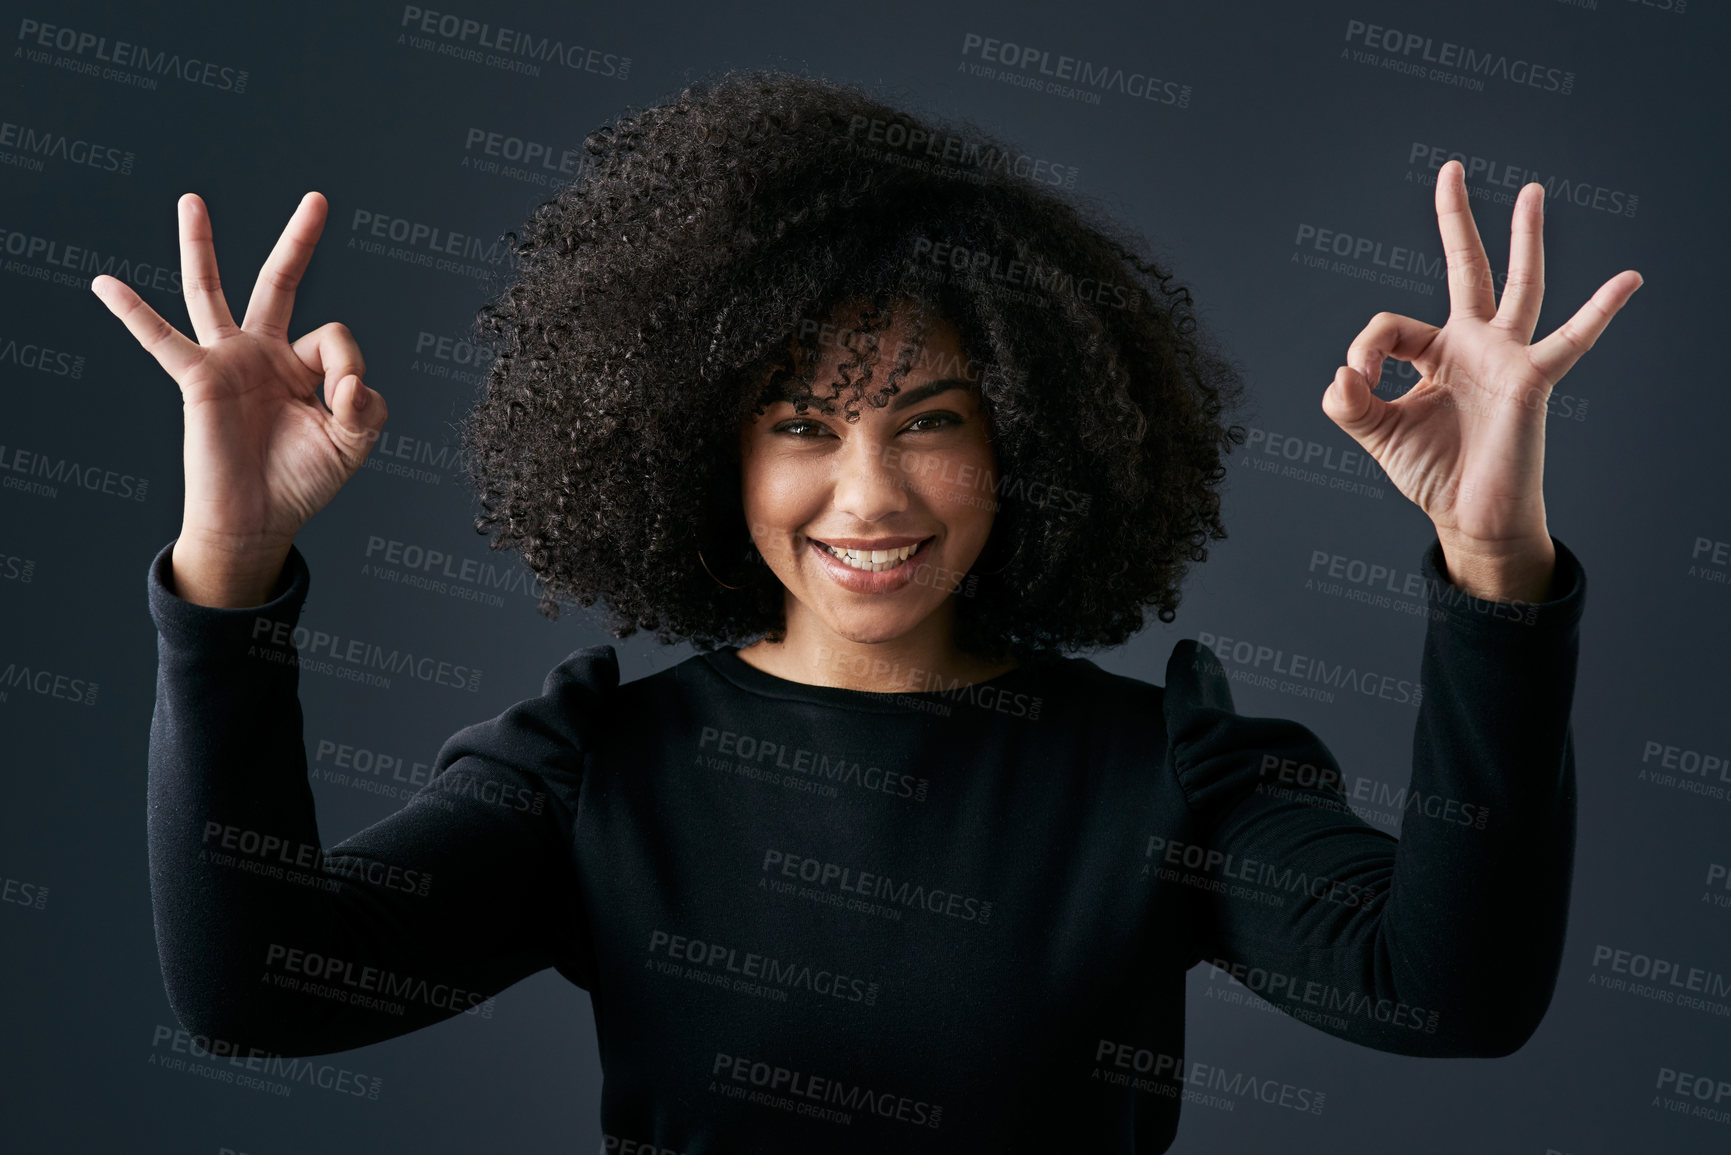 Buy stock photo Shot of a young businesswoman making hand gestures against a studio background